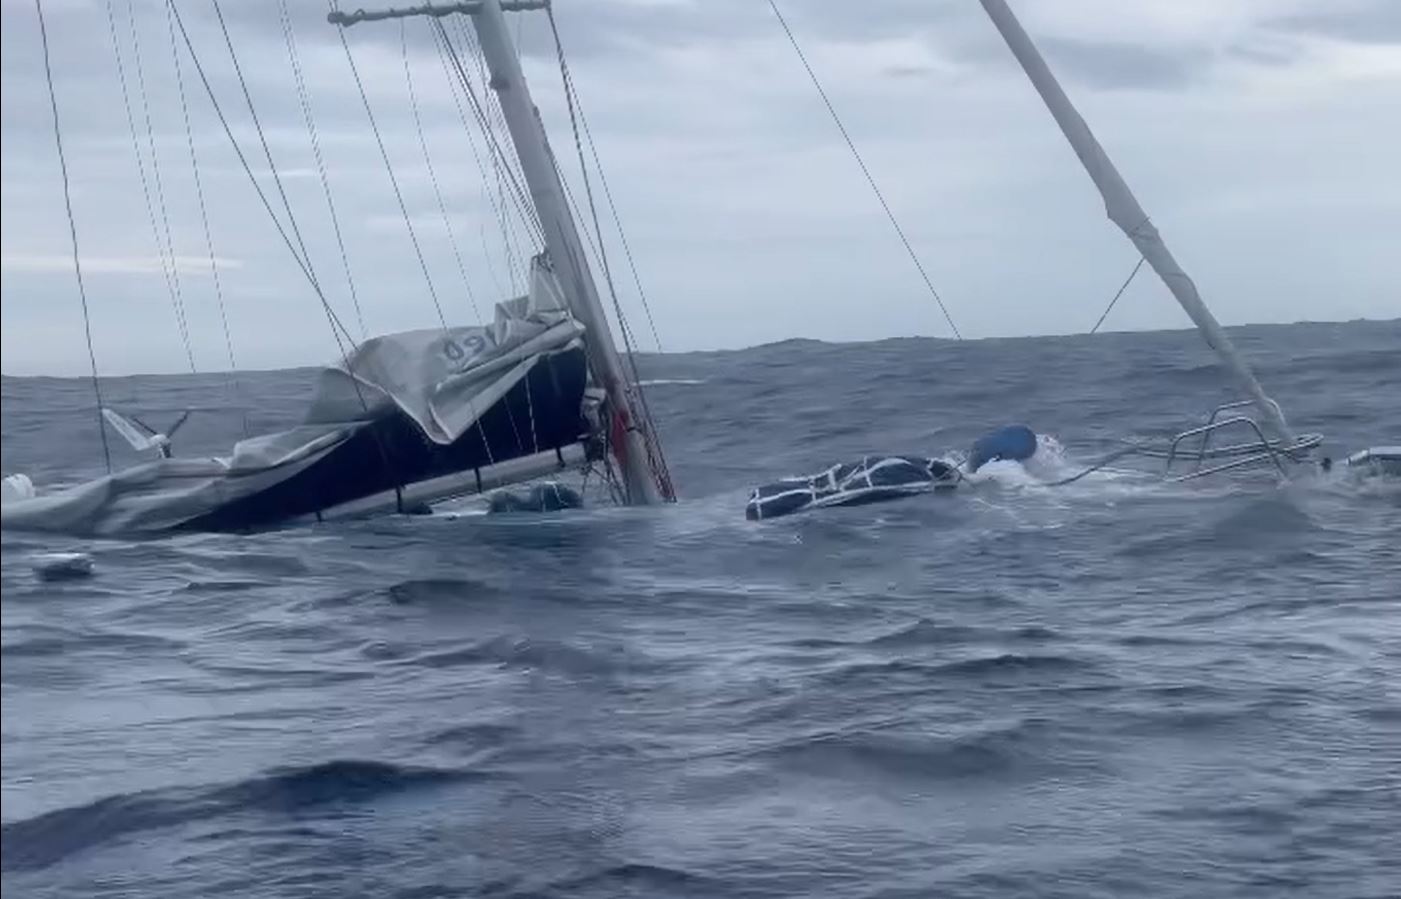 Arcona 460 sinks after rudder failure in the Pacific Ocean